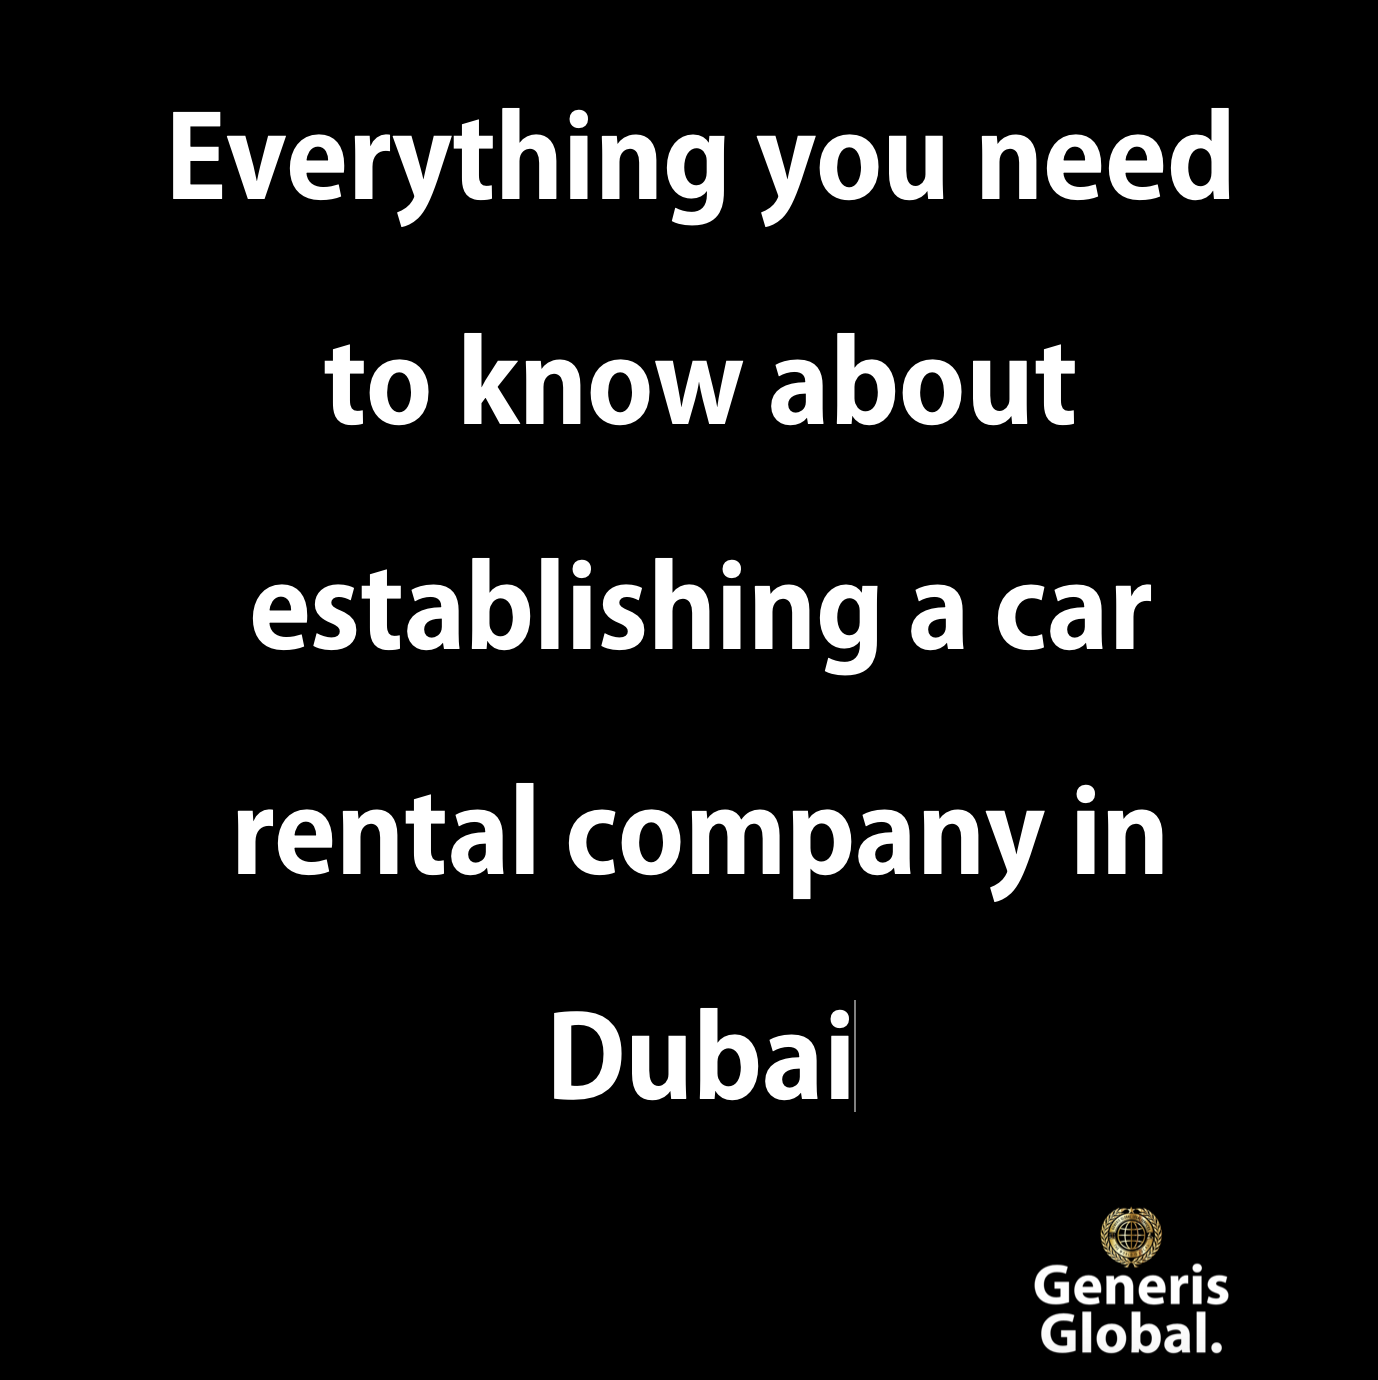 Everything you need to know about establishing a car rental company in Dubai